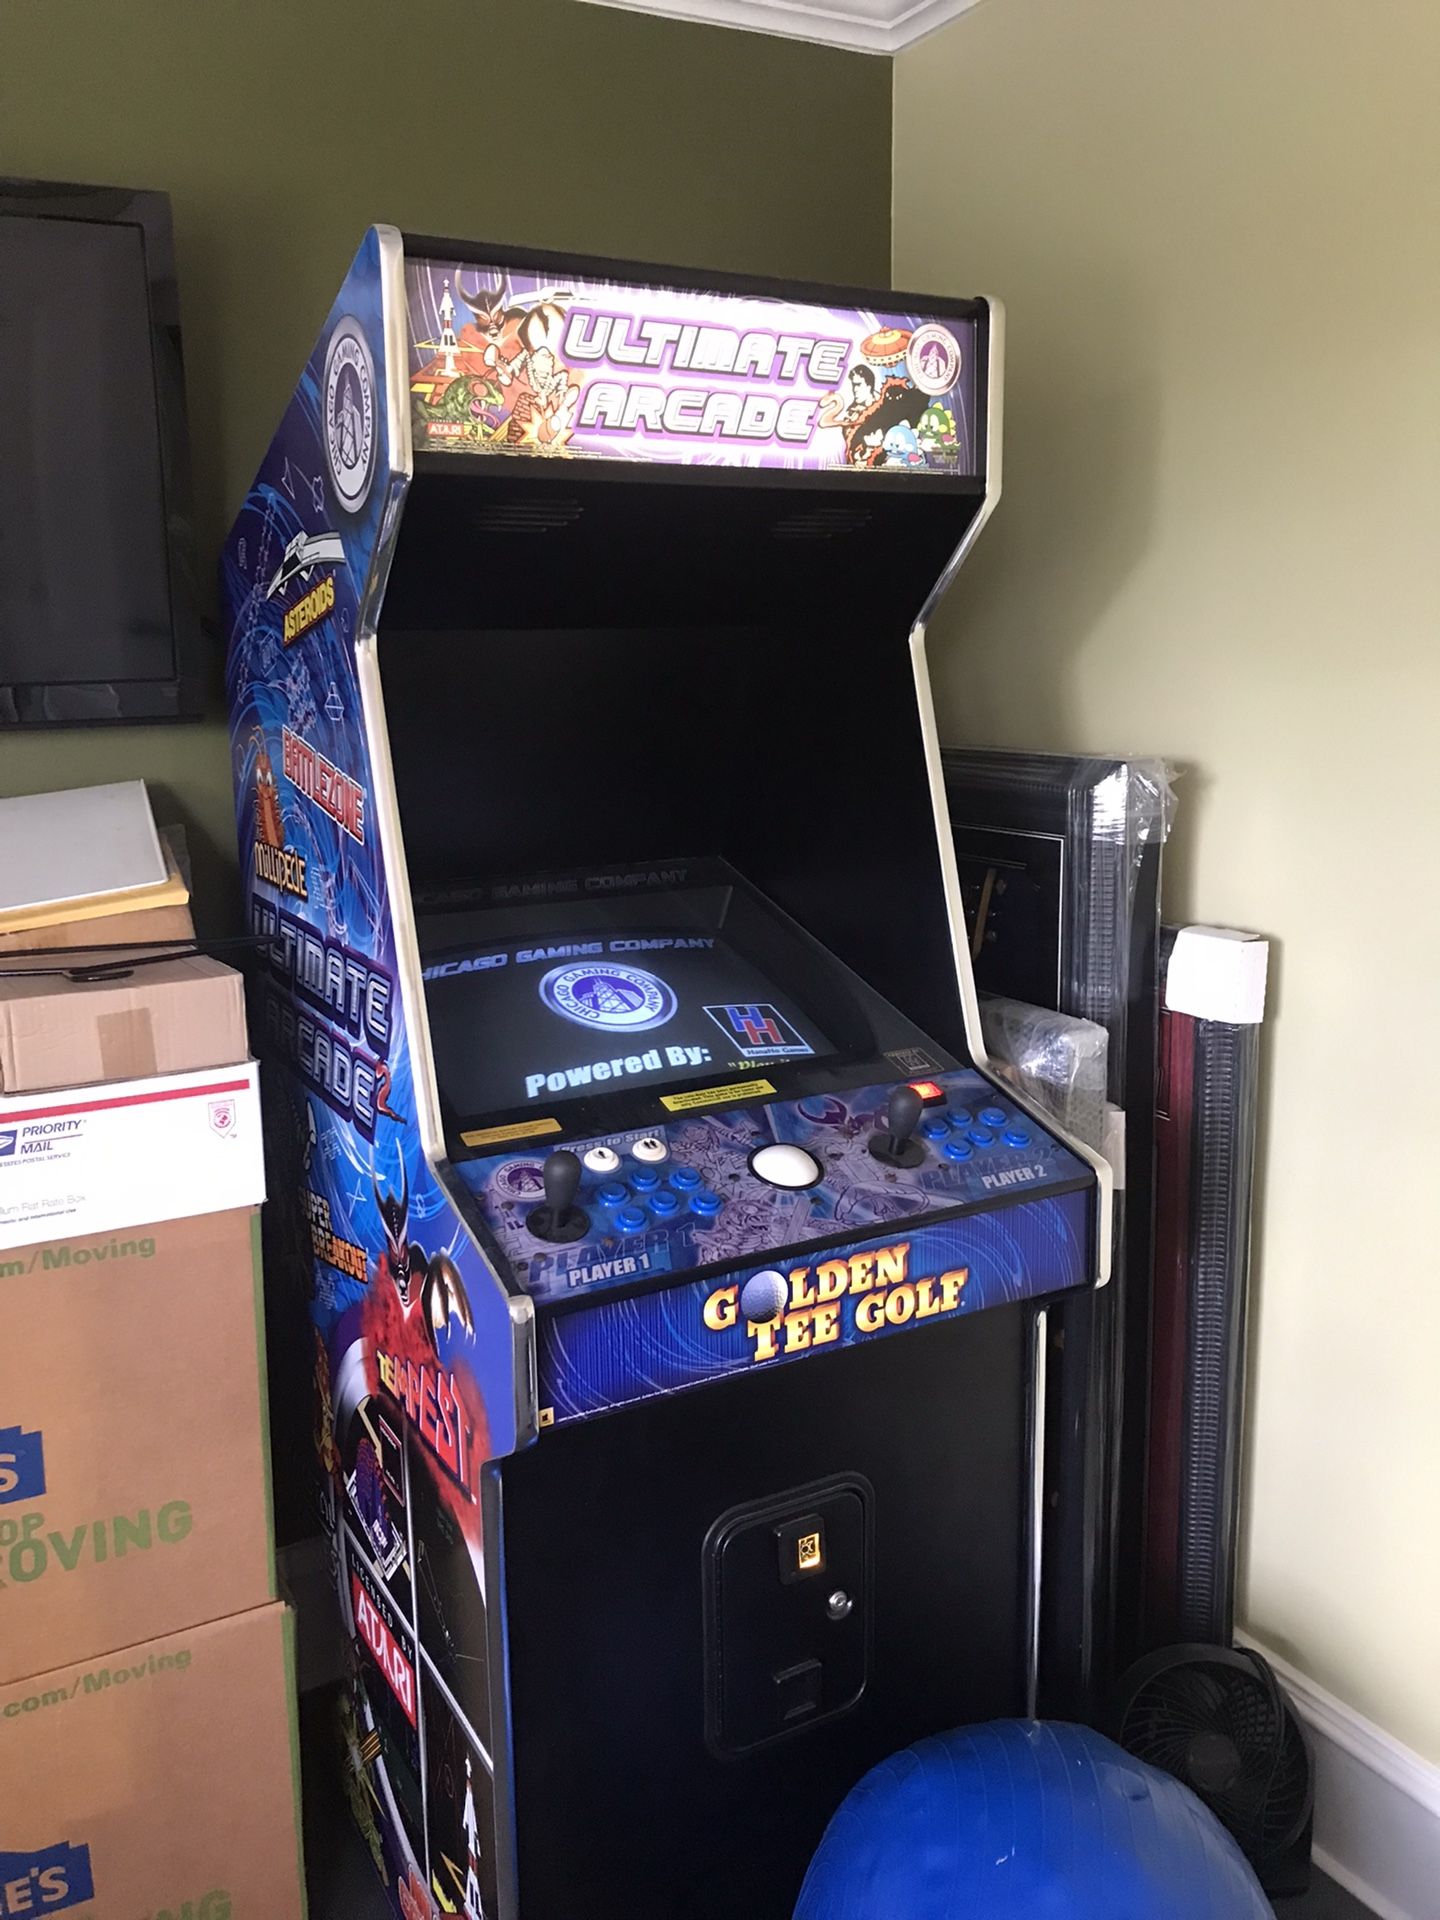 Full Size Like New Ultimate Arcade Legends Loaded W/100 1980’s Arcade Popular Games 